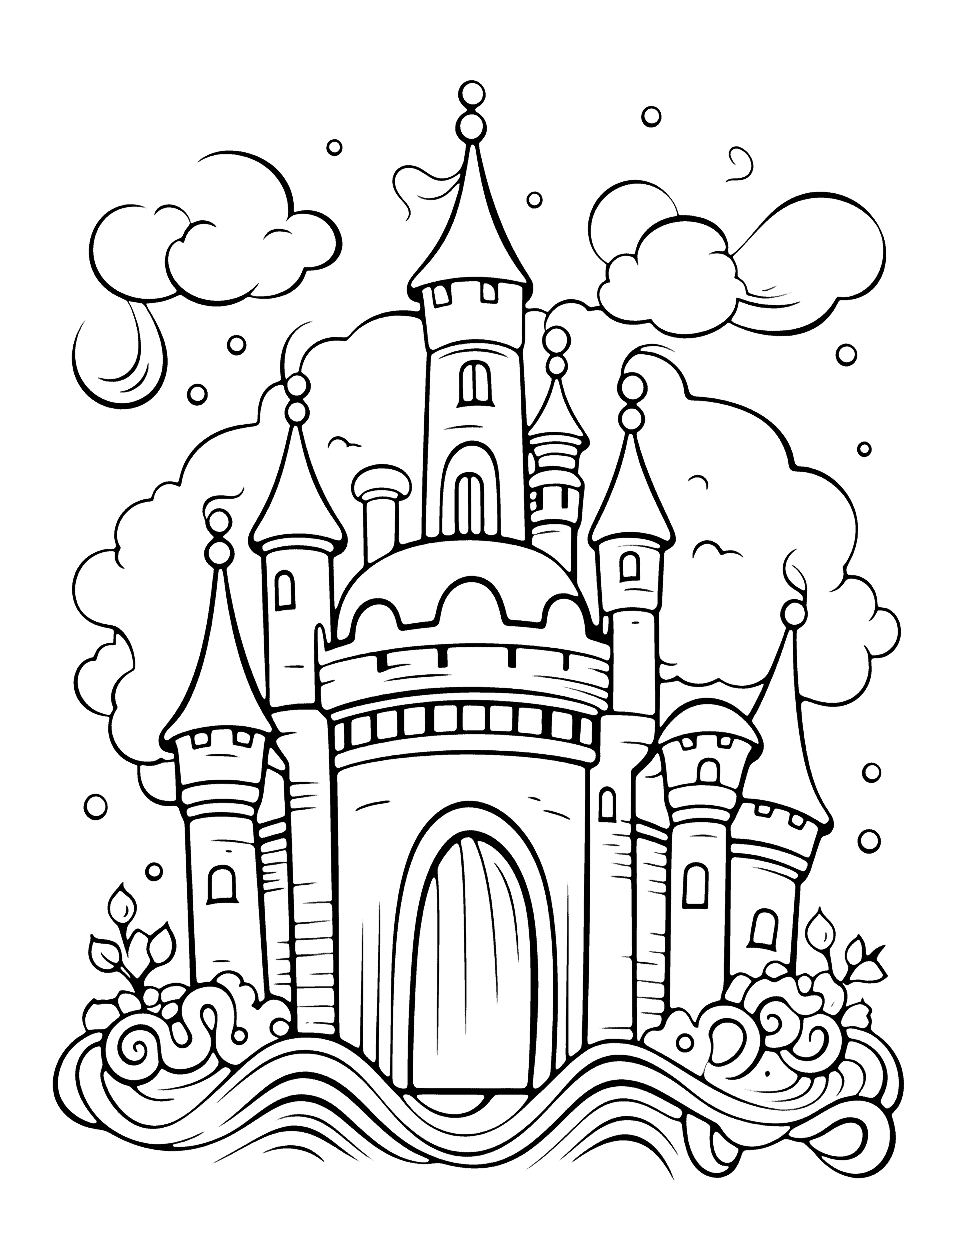 Castle Birthday Happy Coloring Page - A beautiful castle celebrating the king’s birthday.